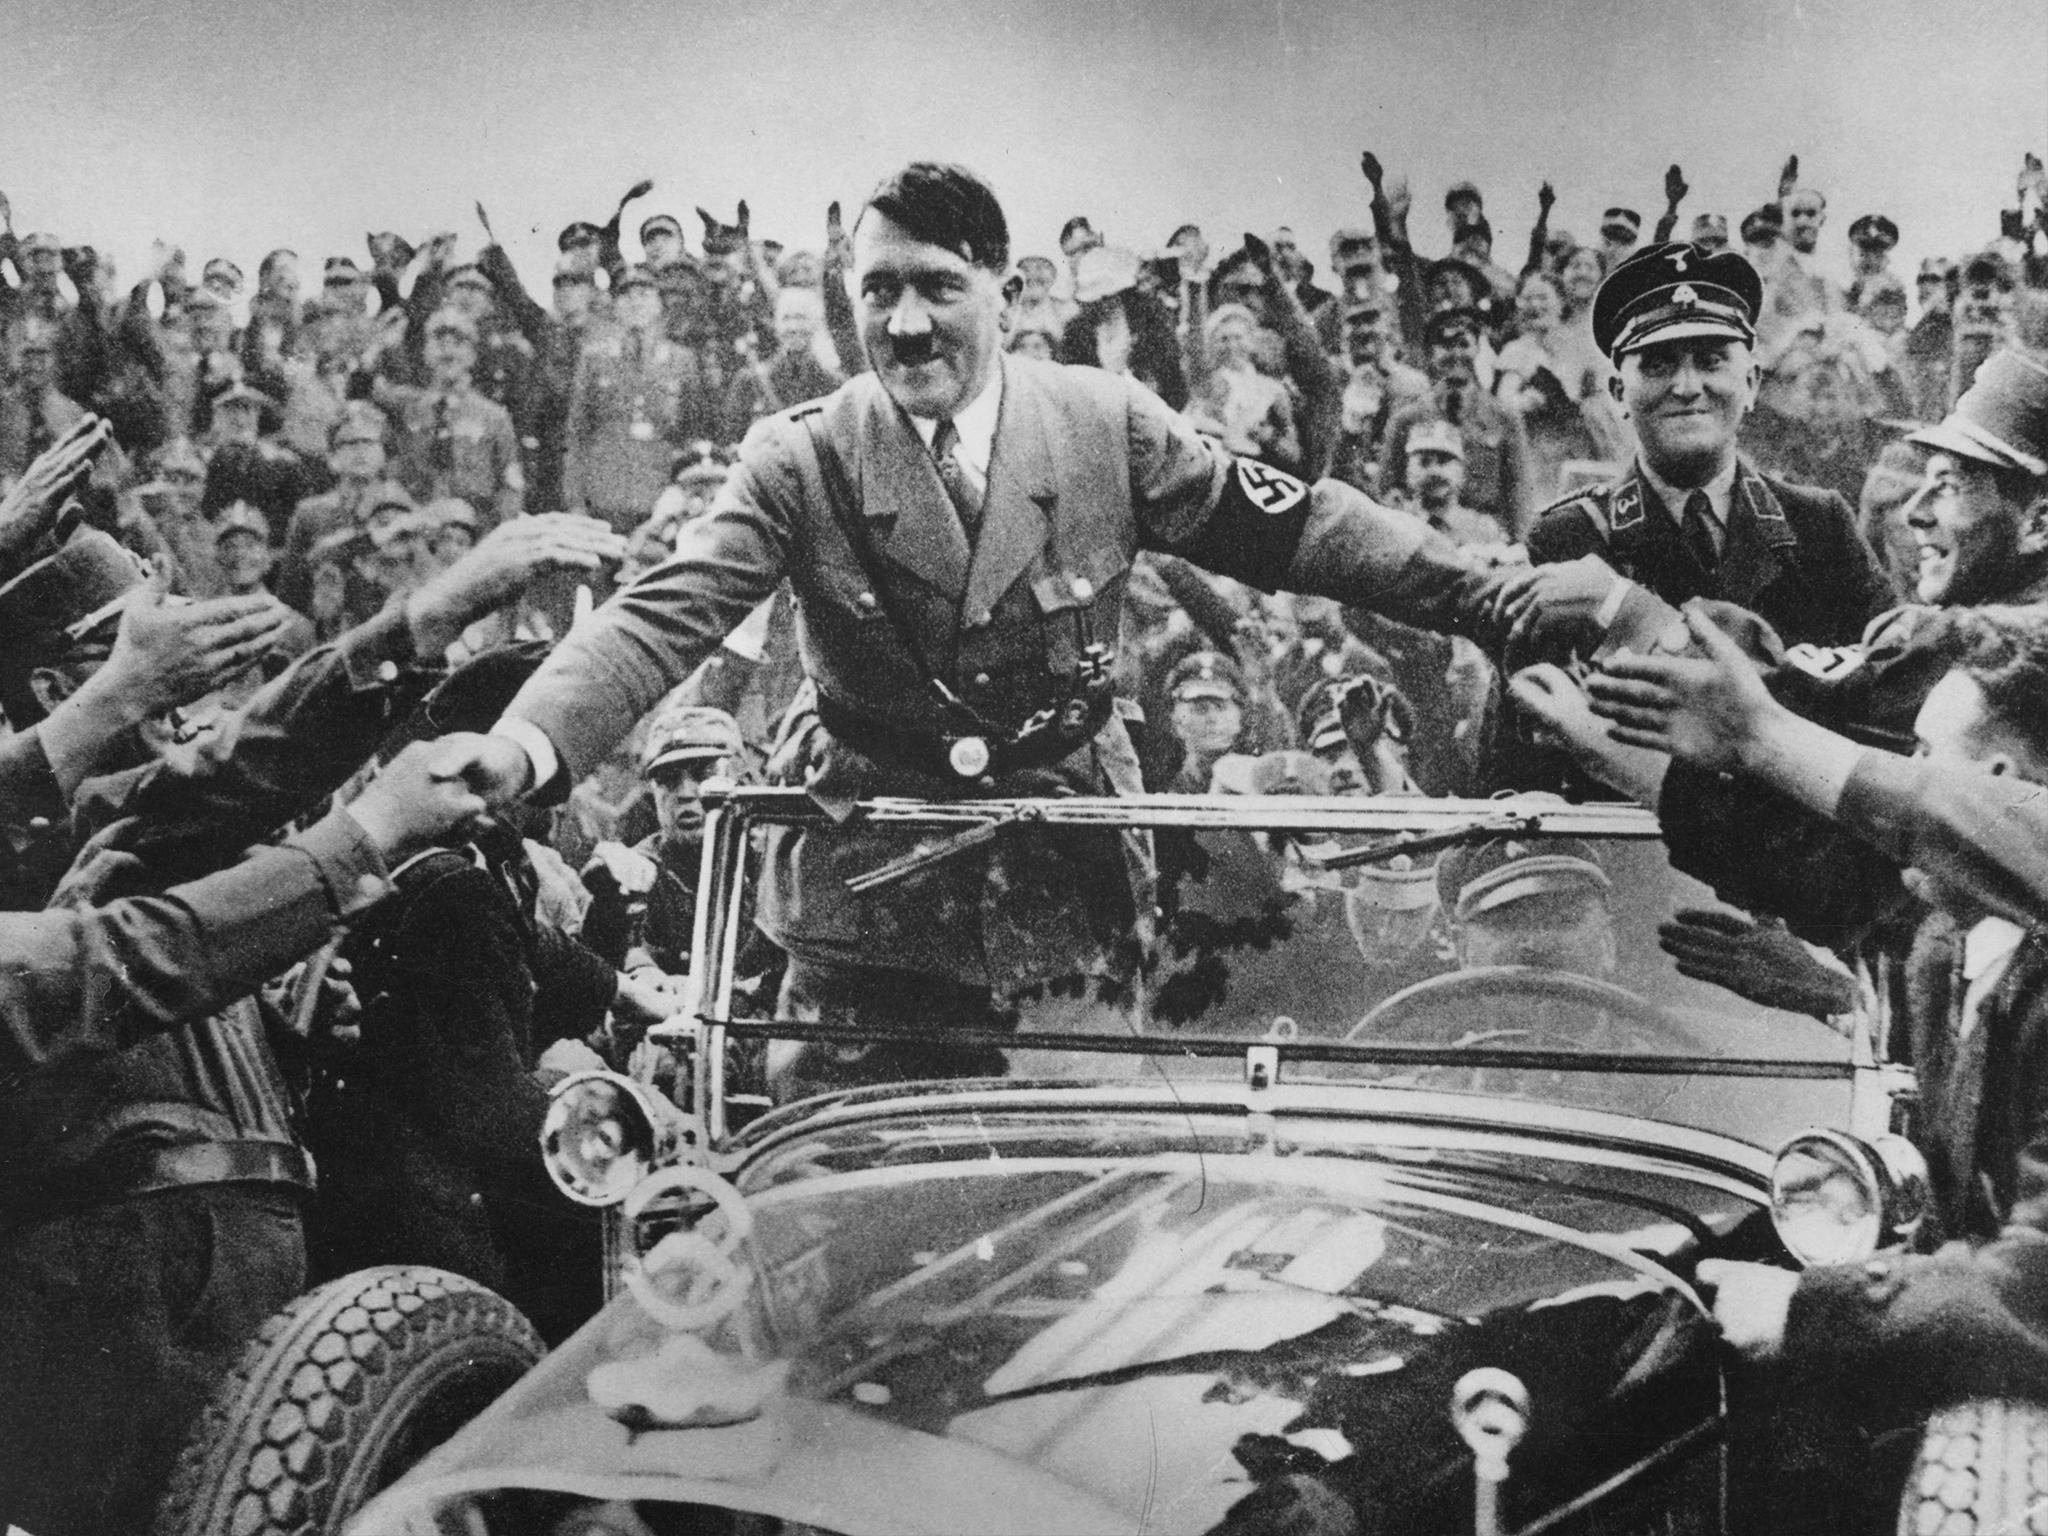 There have been persistent rumours that Adolf Hitler escaped to live among die-hard Nazis in south America, despite the overwhelming consensus that he killed himself in his Berlin bunker